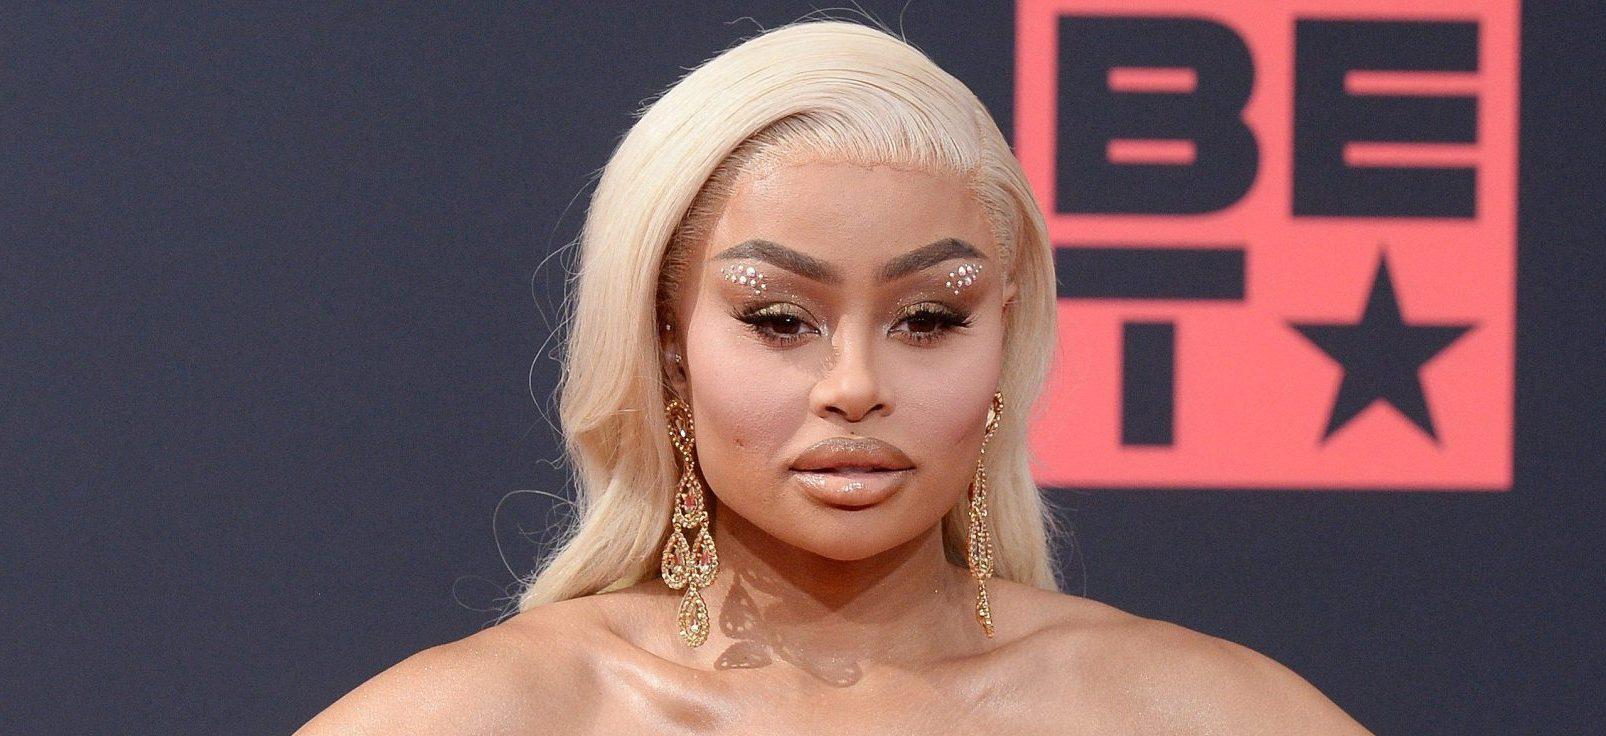 Fans Have Mixed Reaction As Blac Chyna Shows Off Her Doctorate Certificate